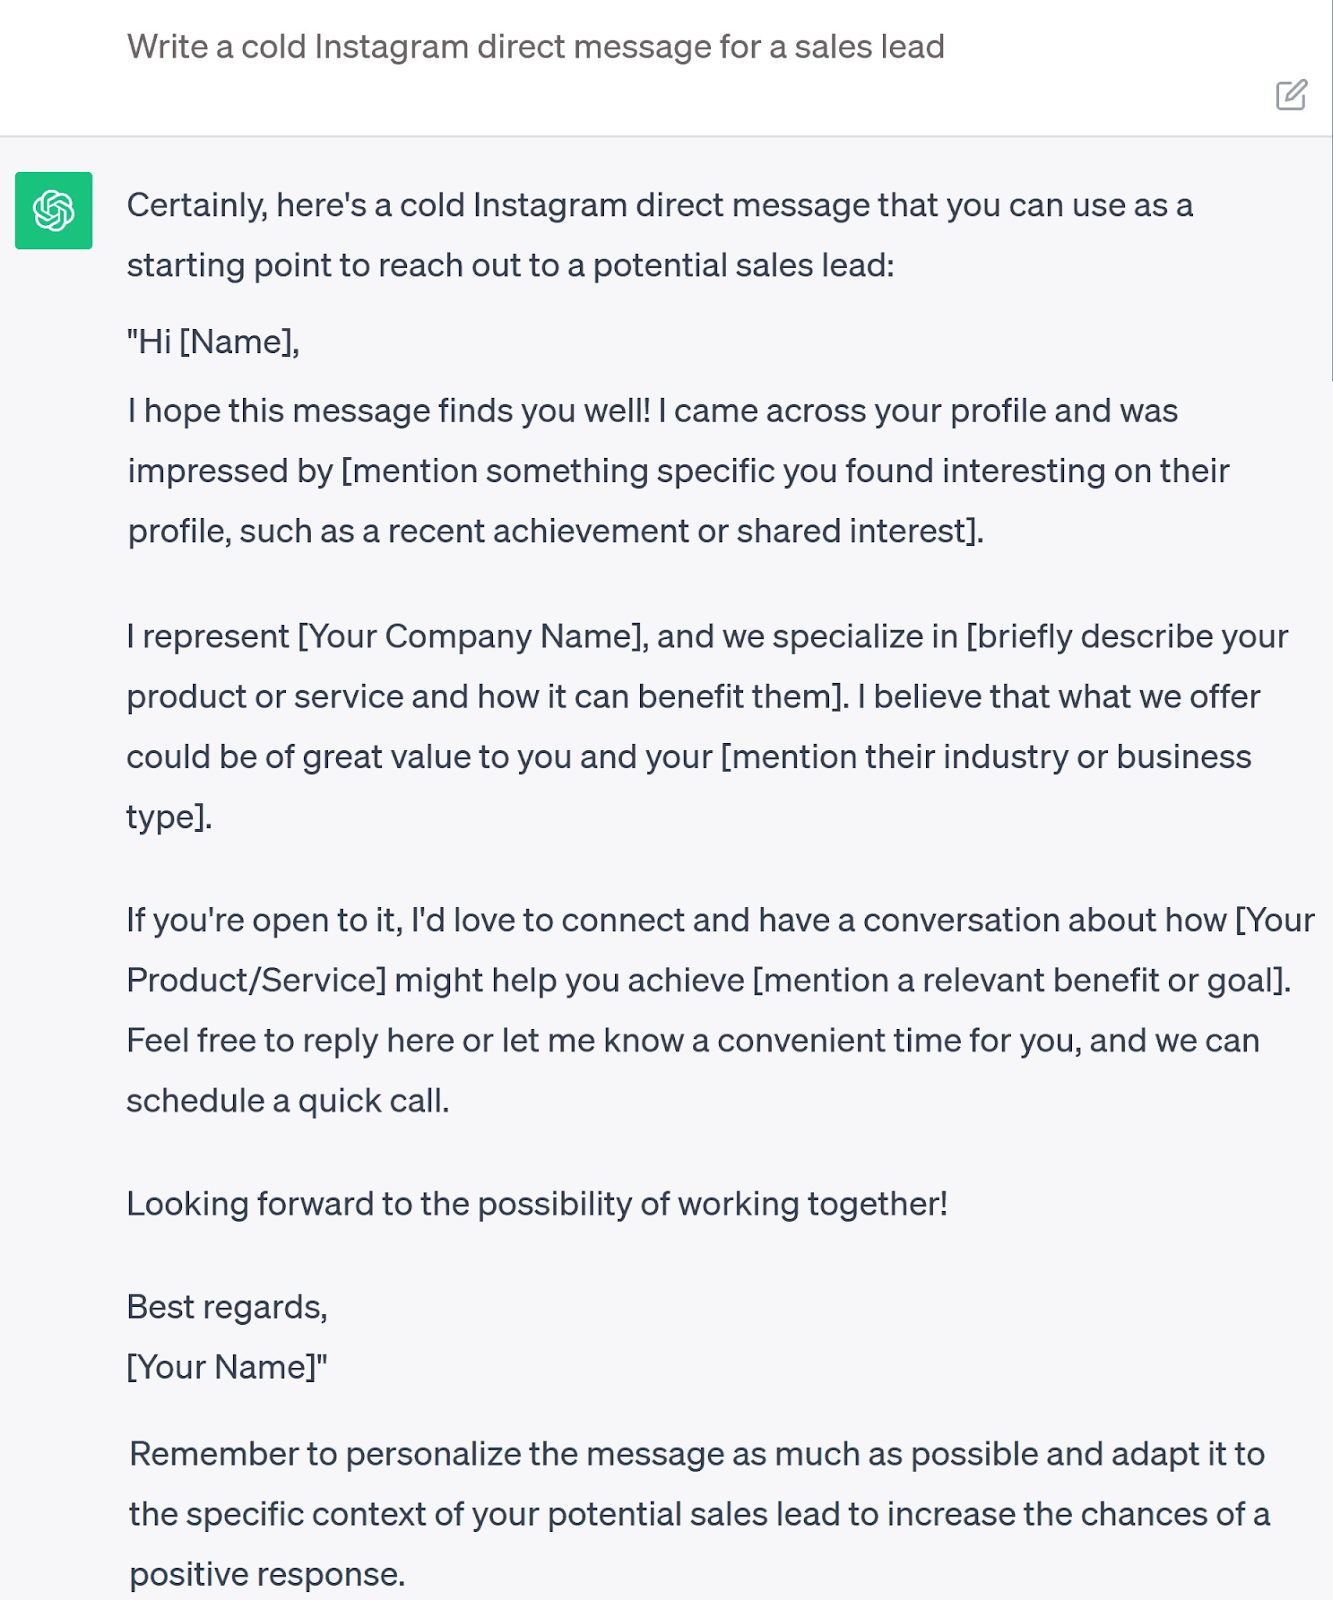 ChatGPT's response to “Write a cold Instagram direct message for a sales lead” query